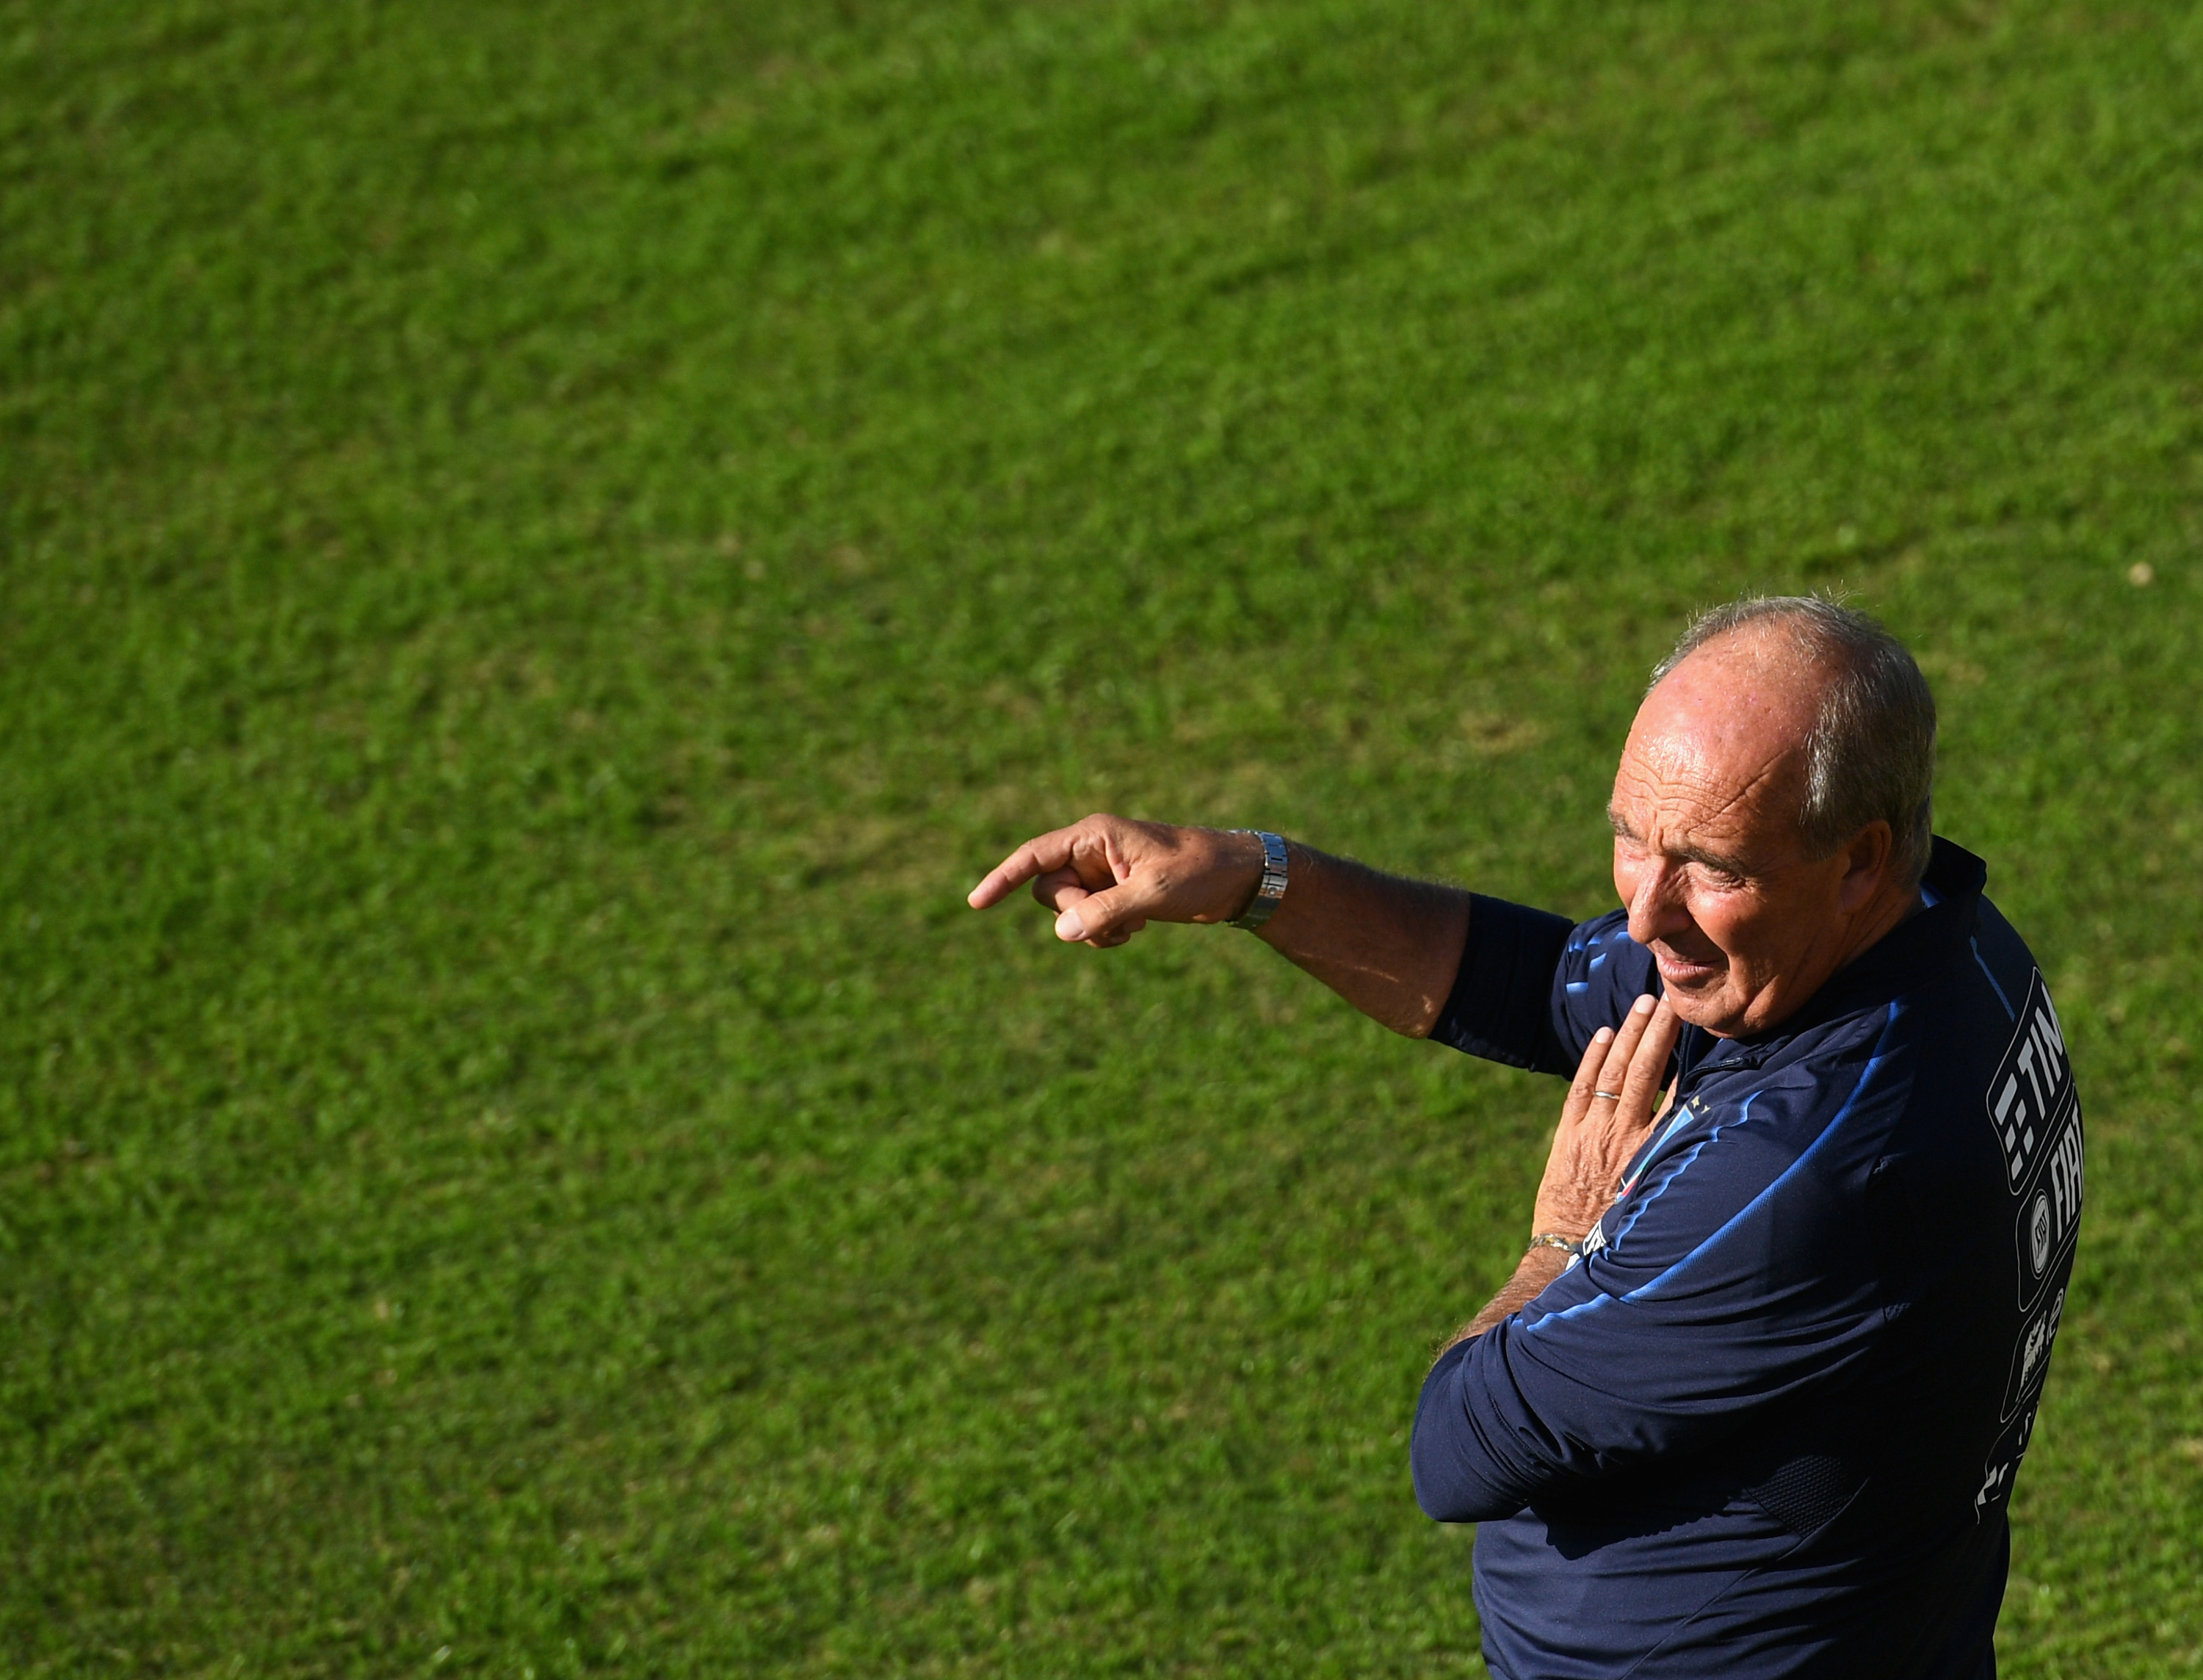 FLORENCE, ITALY - OCTOBER 04:  Head coach Italy Gian Piero Ventura reacts during the training session at Italy club's training ground at Coverciano on October 4, 2017 in Florence, Italy.  (Photo by Claudio Villa/Getty Images)